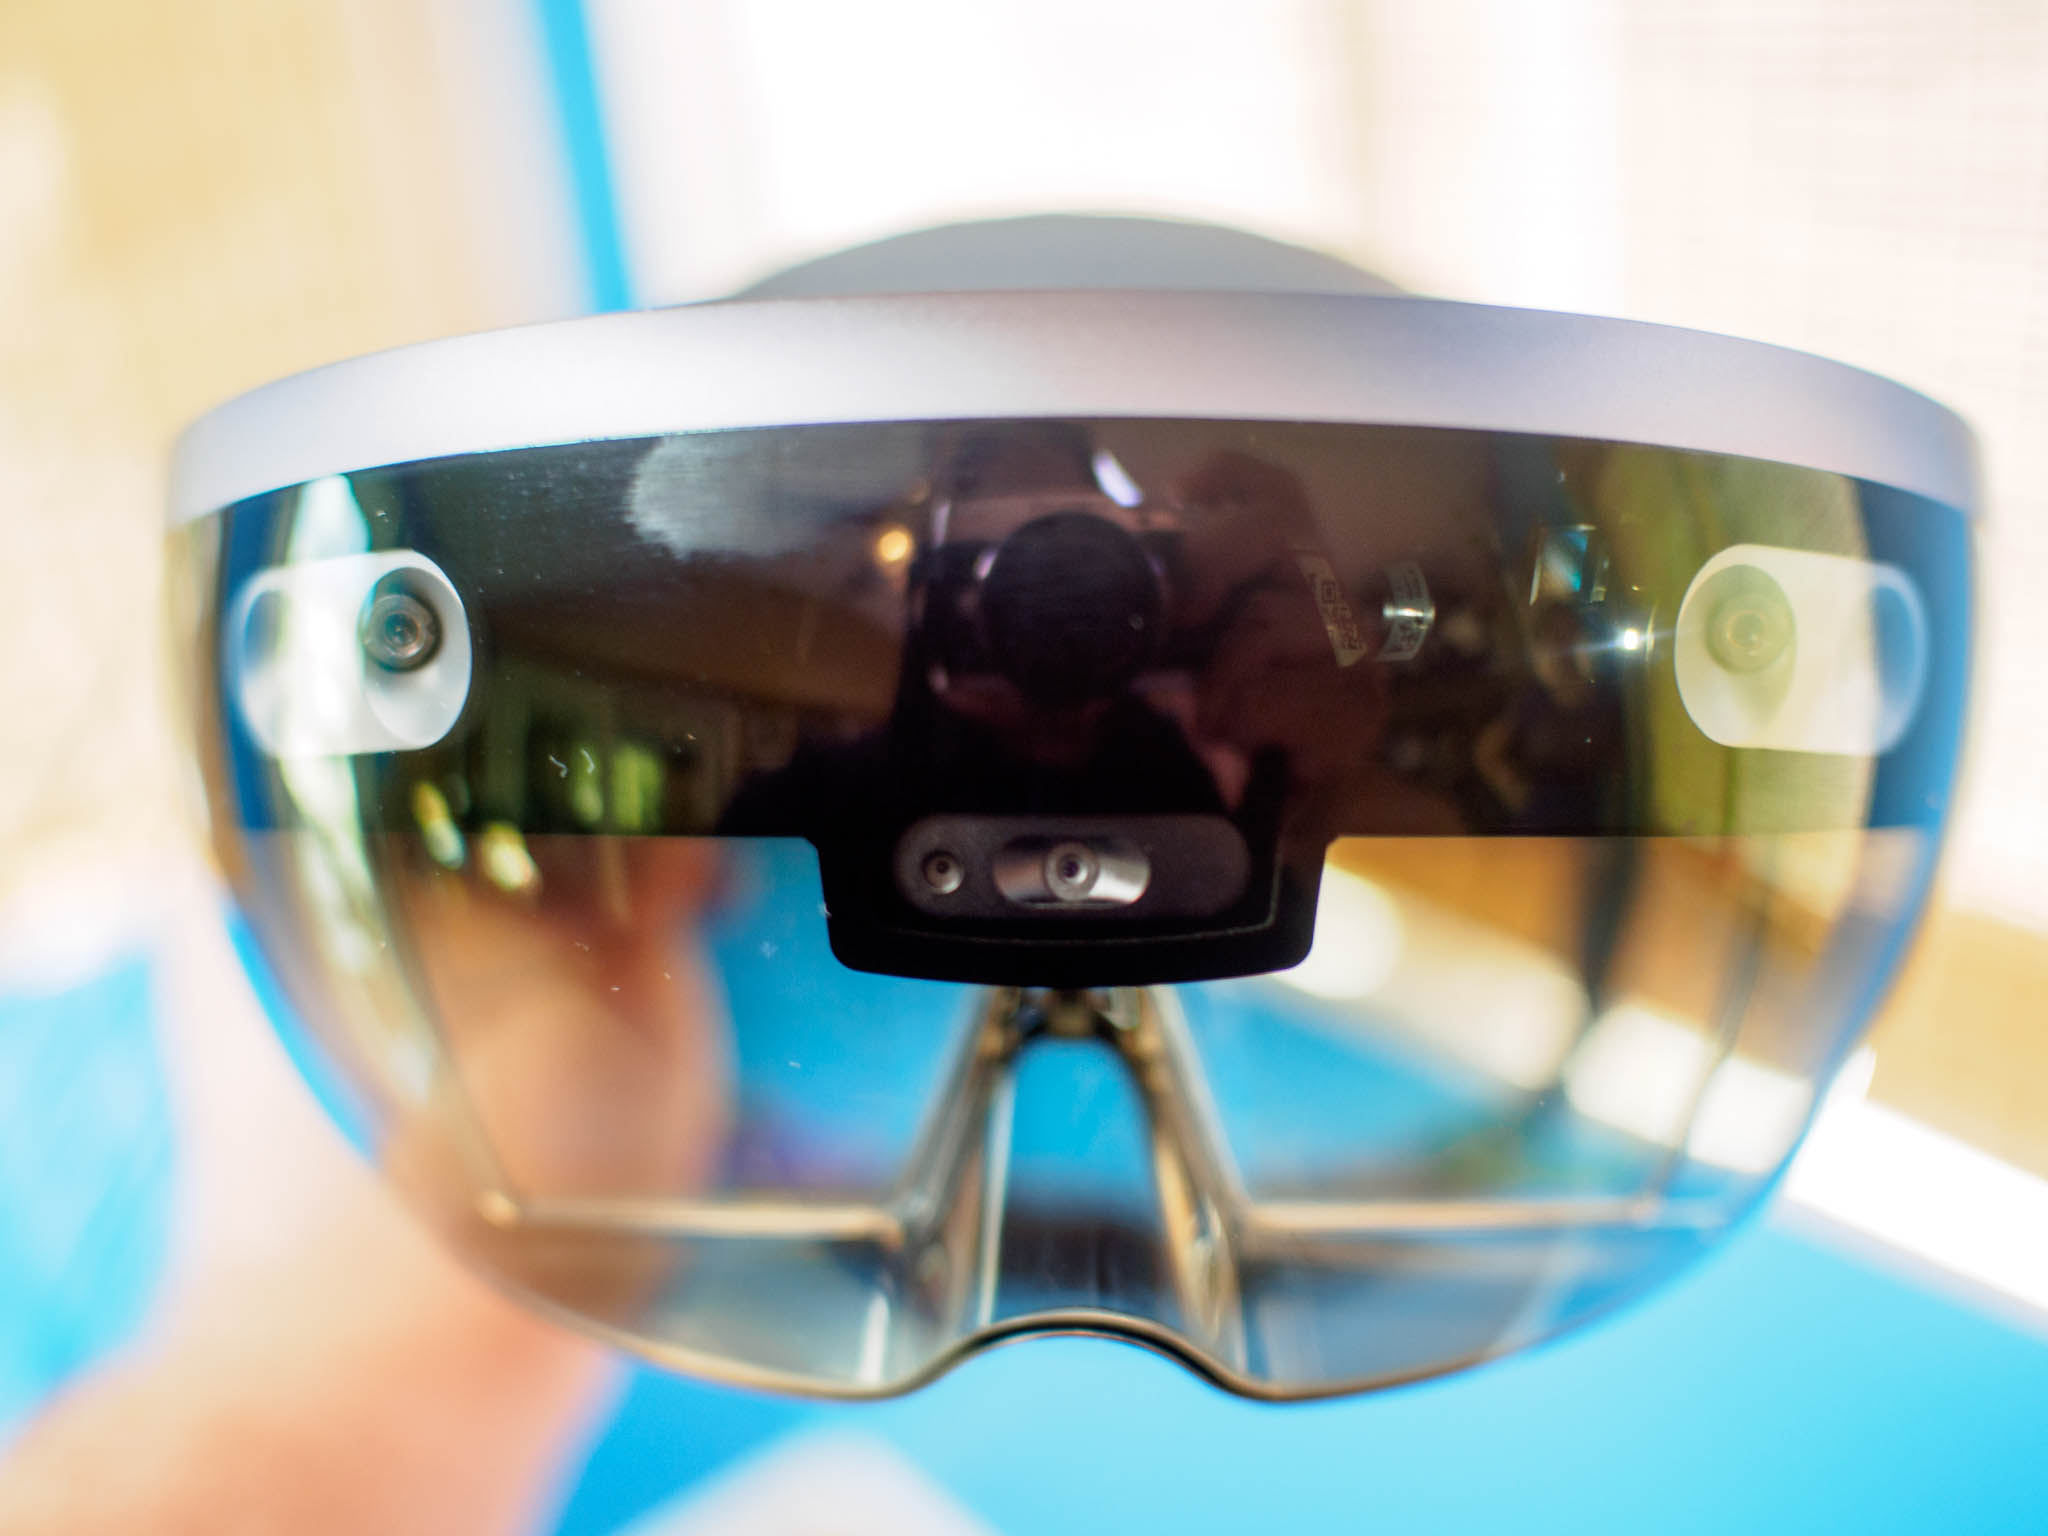 Microsoft hit with patent infringement suit over HoloLens tech